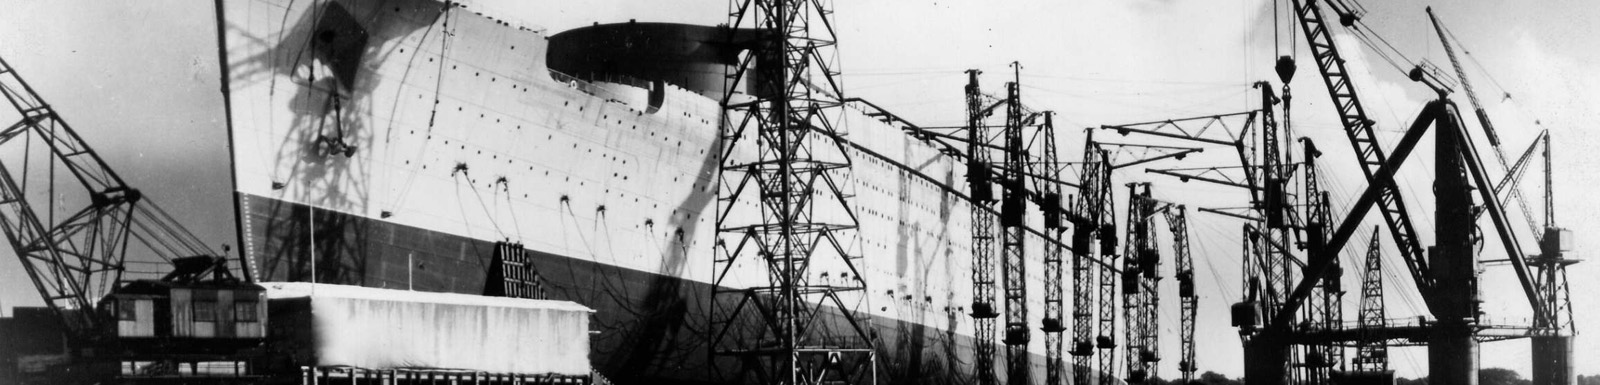 Shipbuilding in Clydebank, image courtesy Culture & Sport Glasgow/Mitchell Library